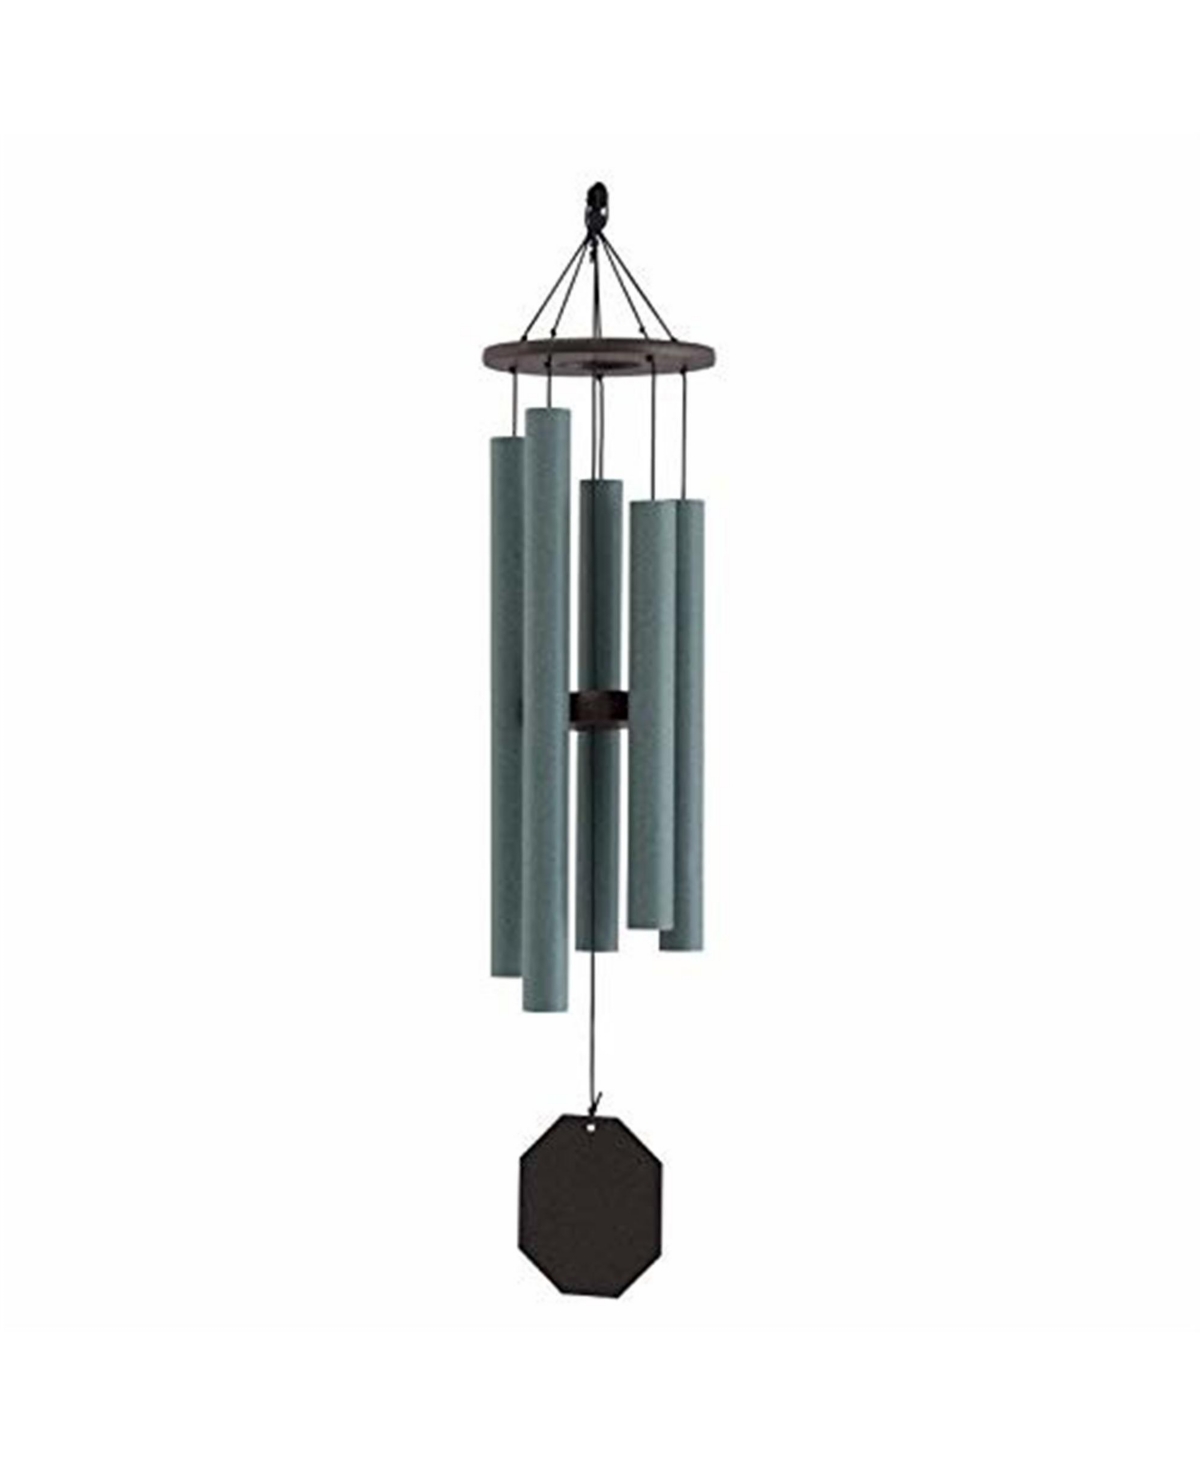 38 Solar Singer Wind Chime Amish Crafted Chime - Multi